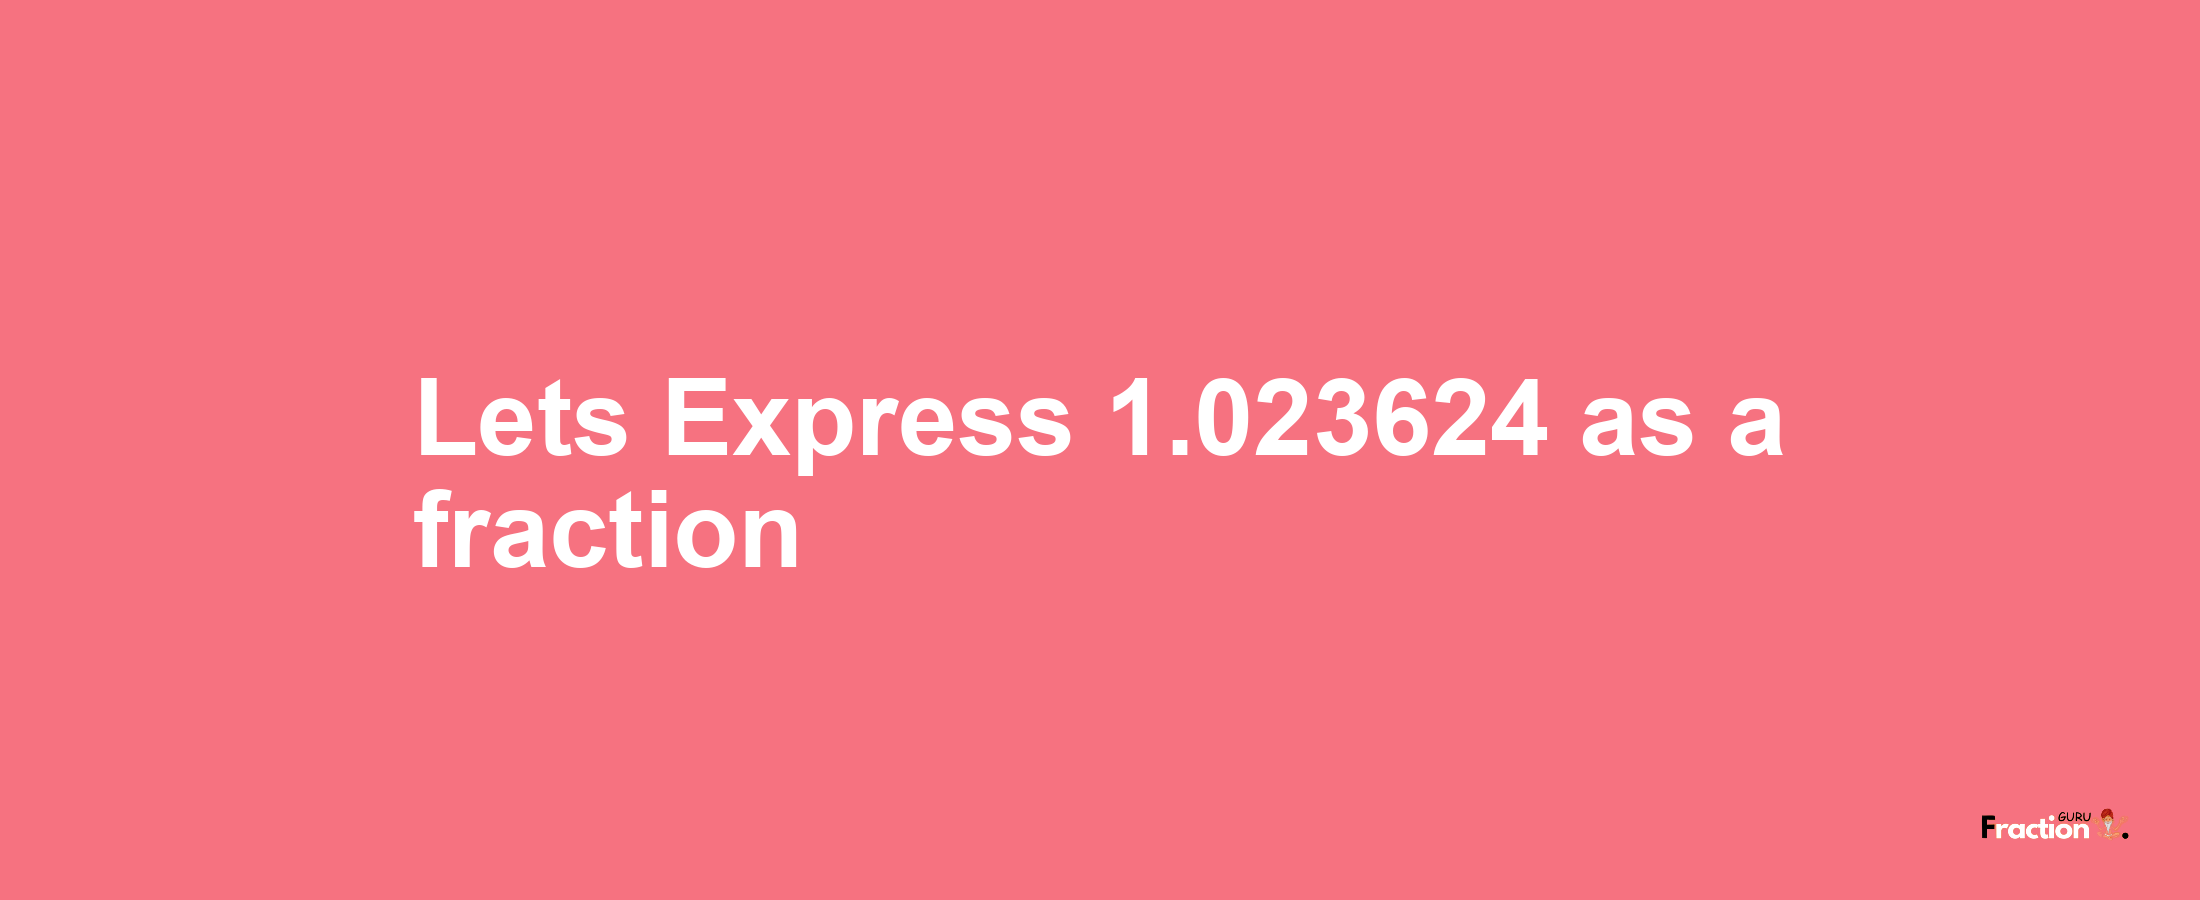 Lets Express 1.023624 as afraction